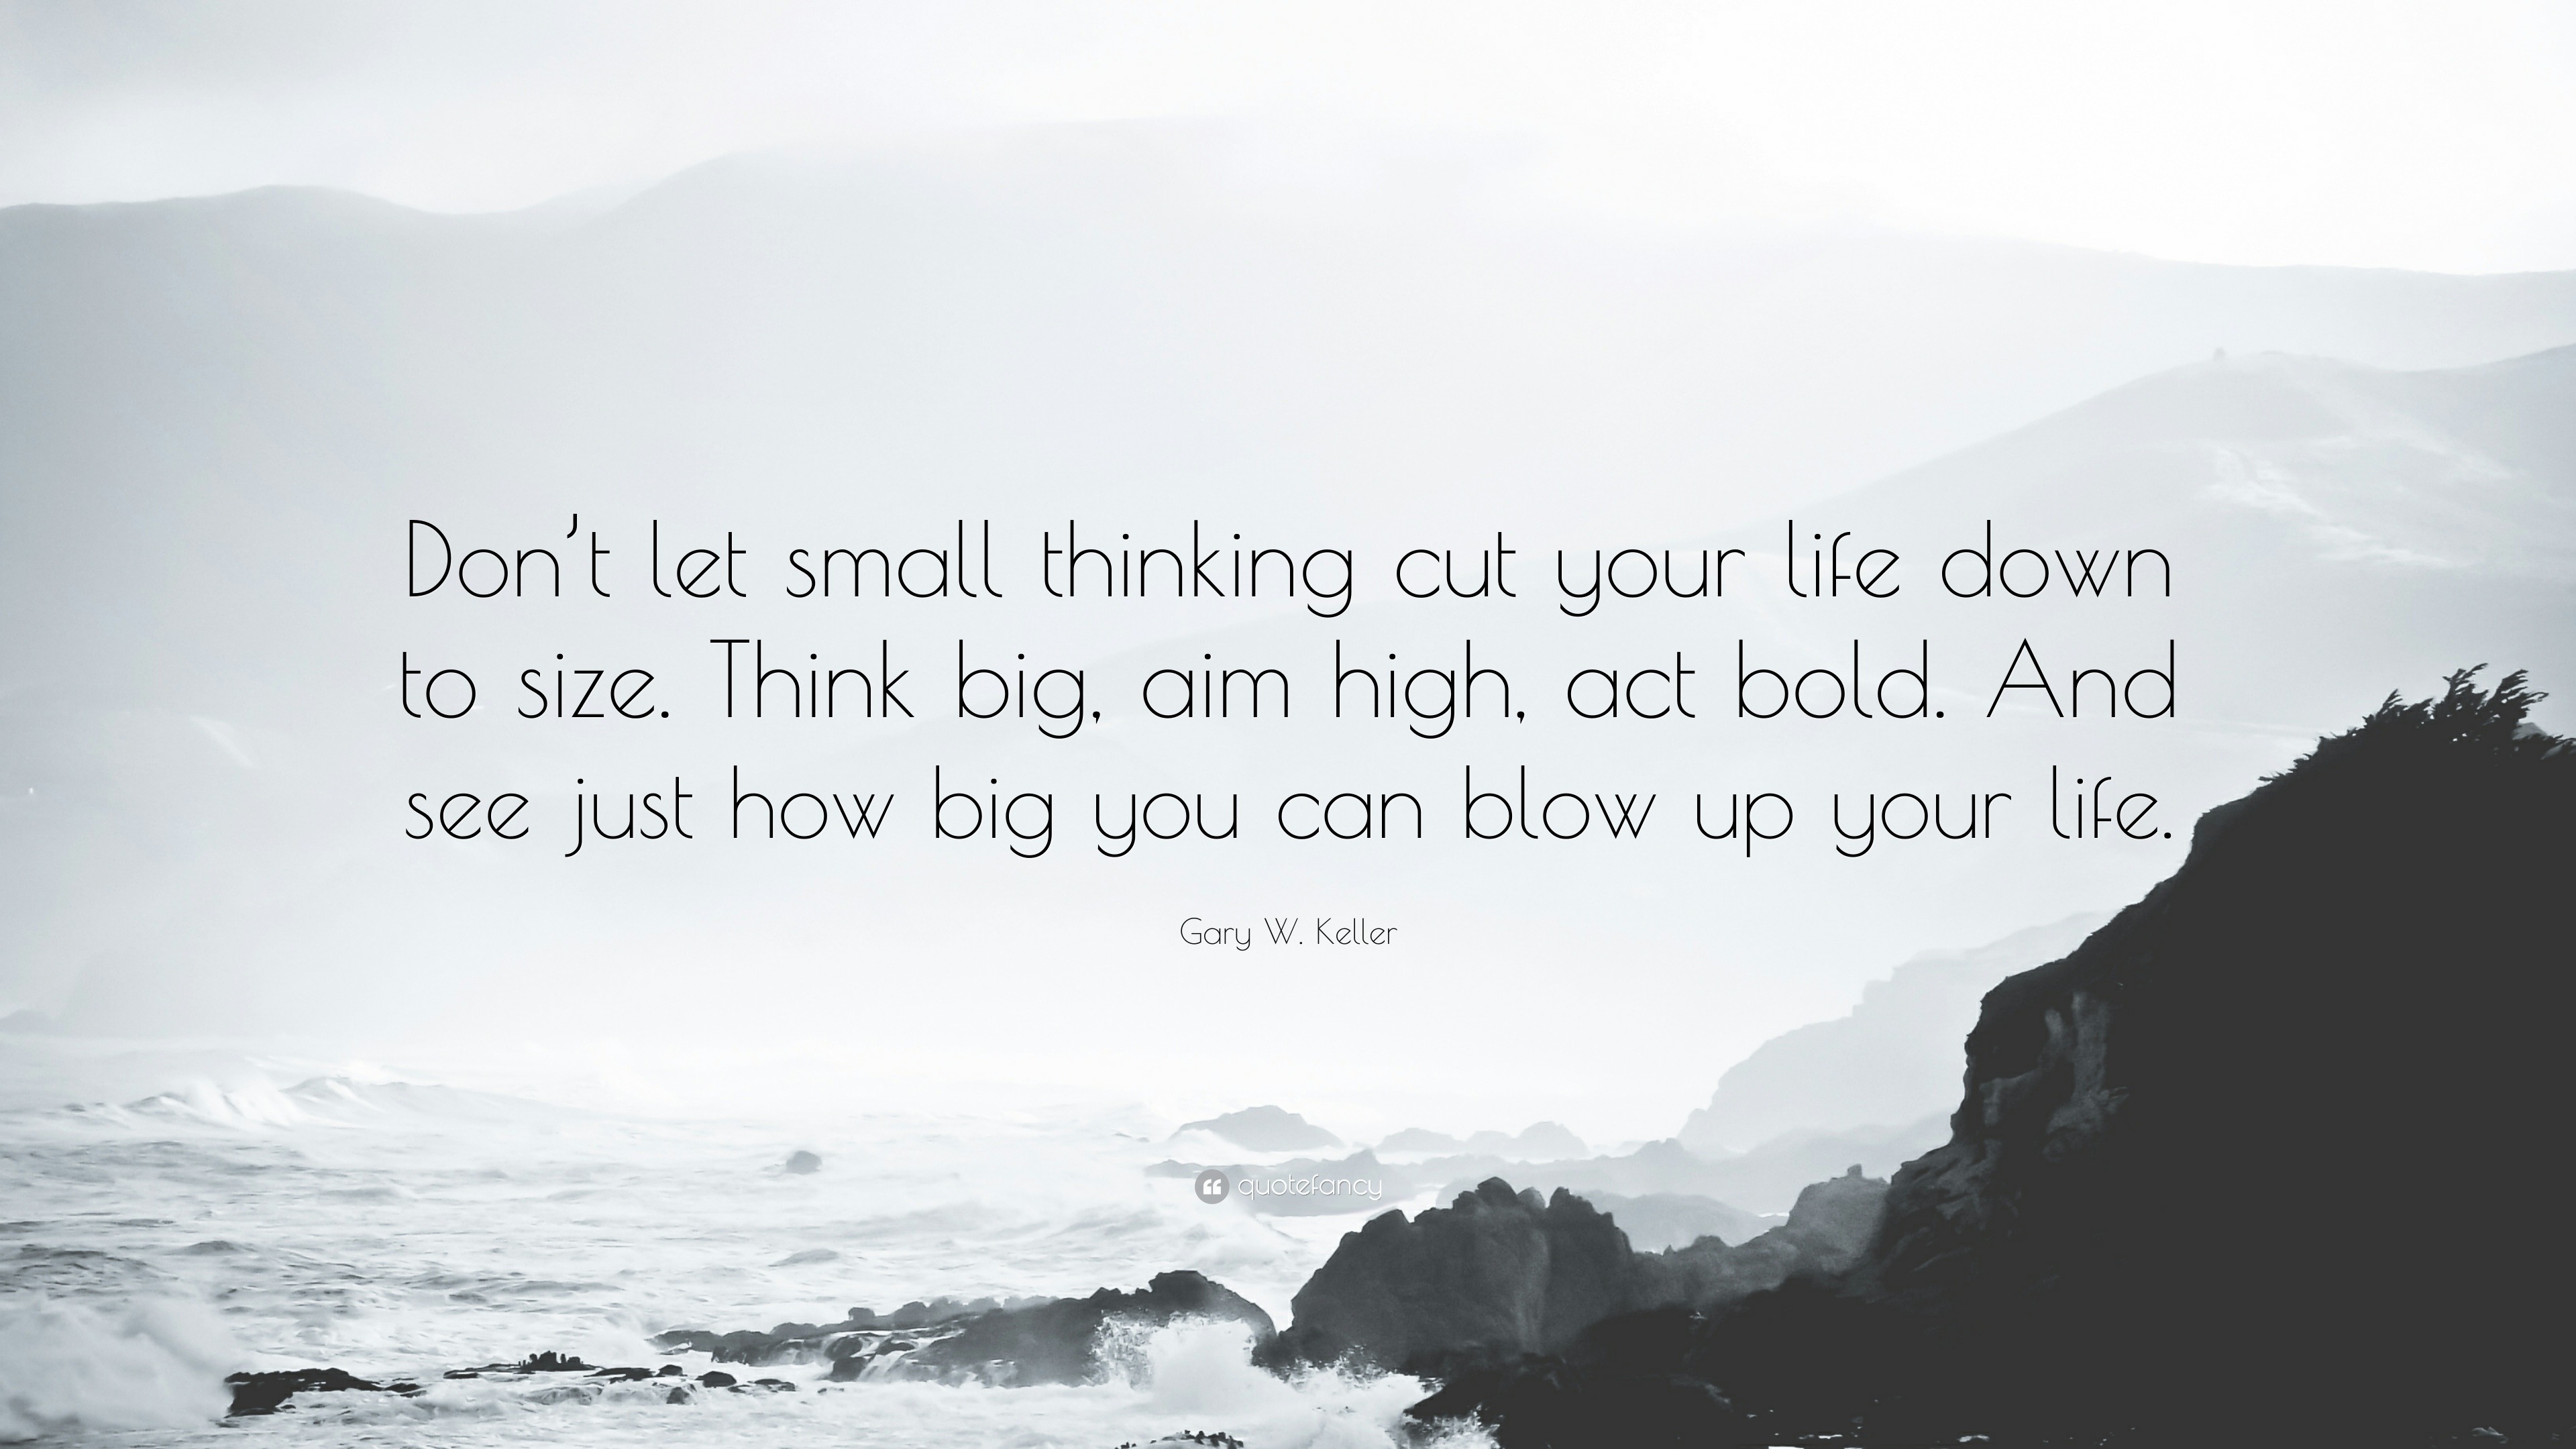 https://quotefancy.com/media/wallpaper/3840x2160/1250337-Gary-W-Keller-Quote-Don-t-let-small-thinking-cut-your-life-down-to.jpg